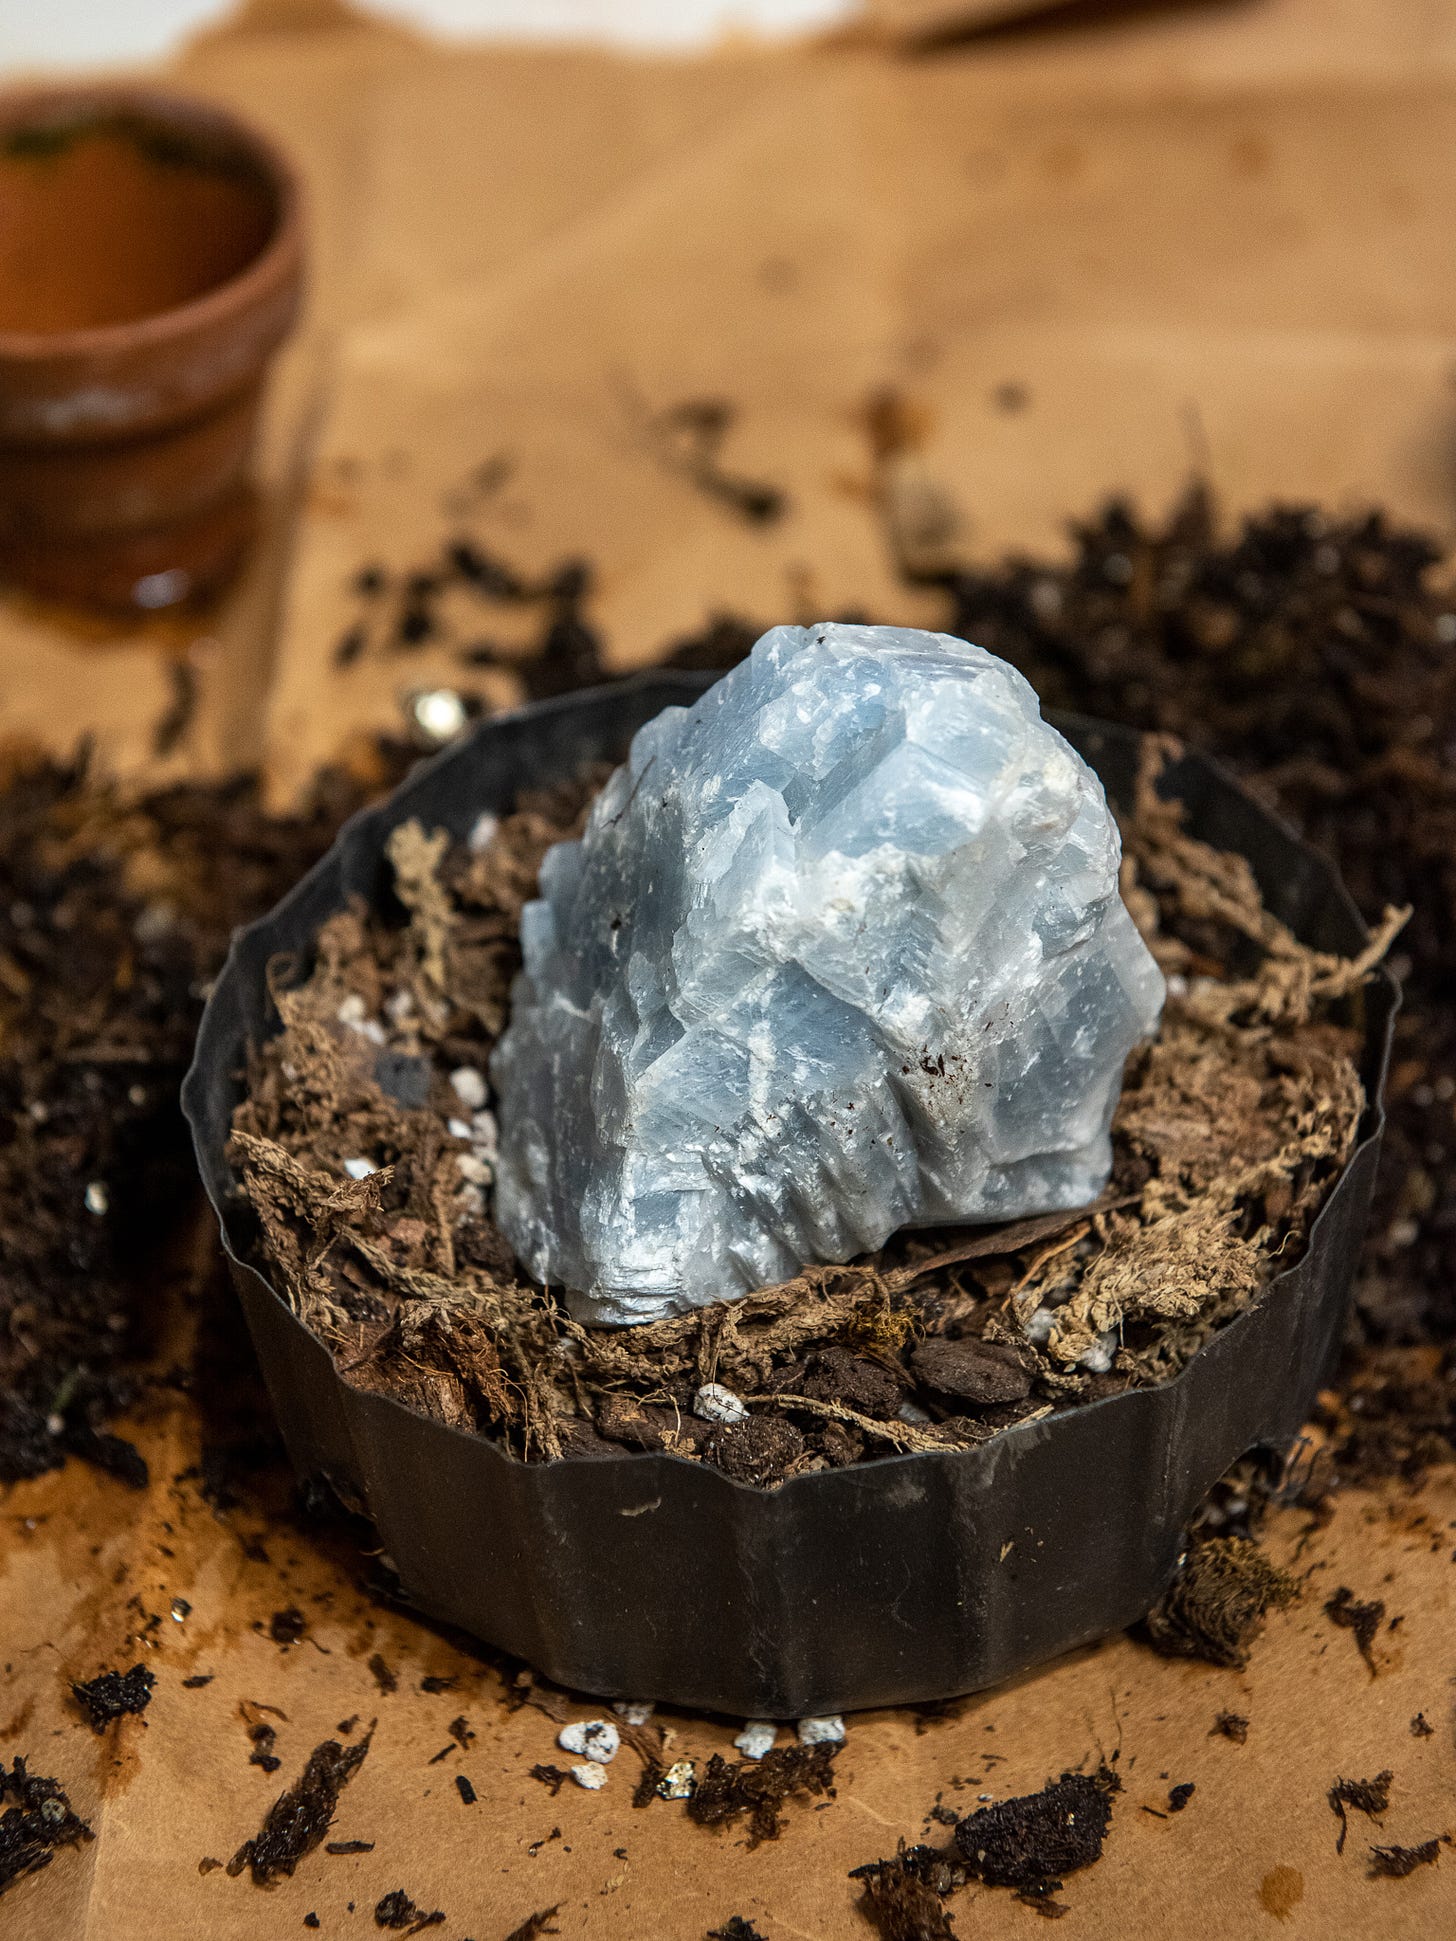 ID: A six inch shallow nursery pot filled with soil with the blue crystal in the center.